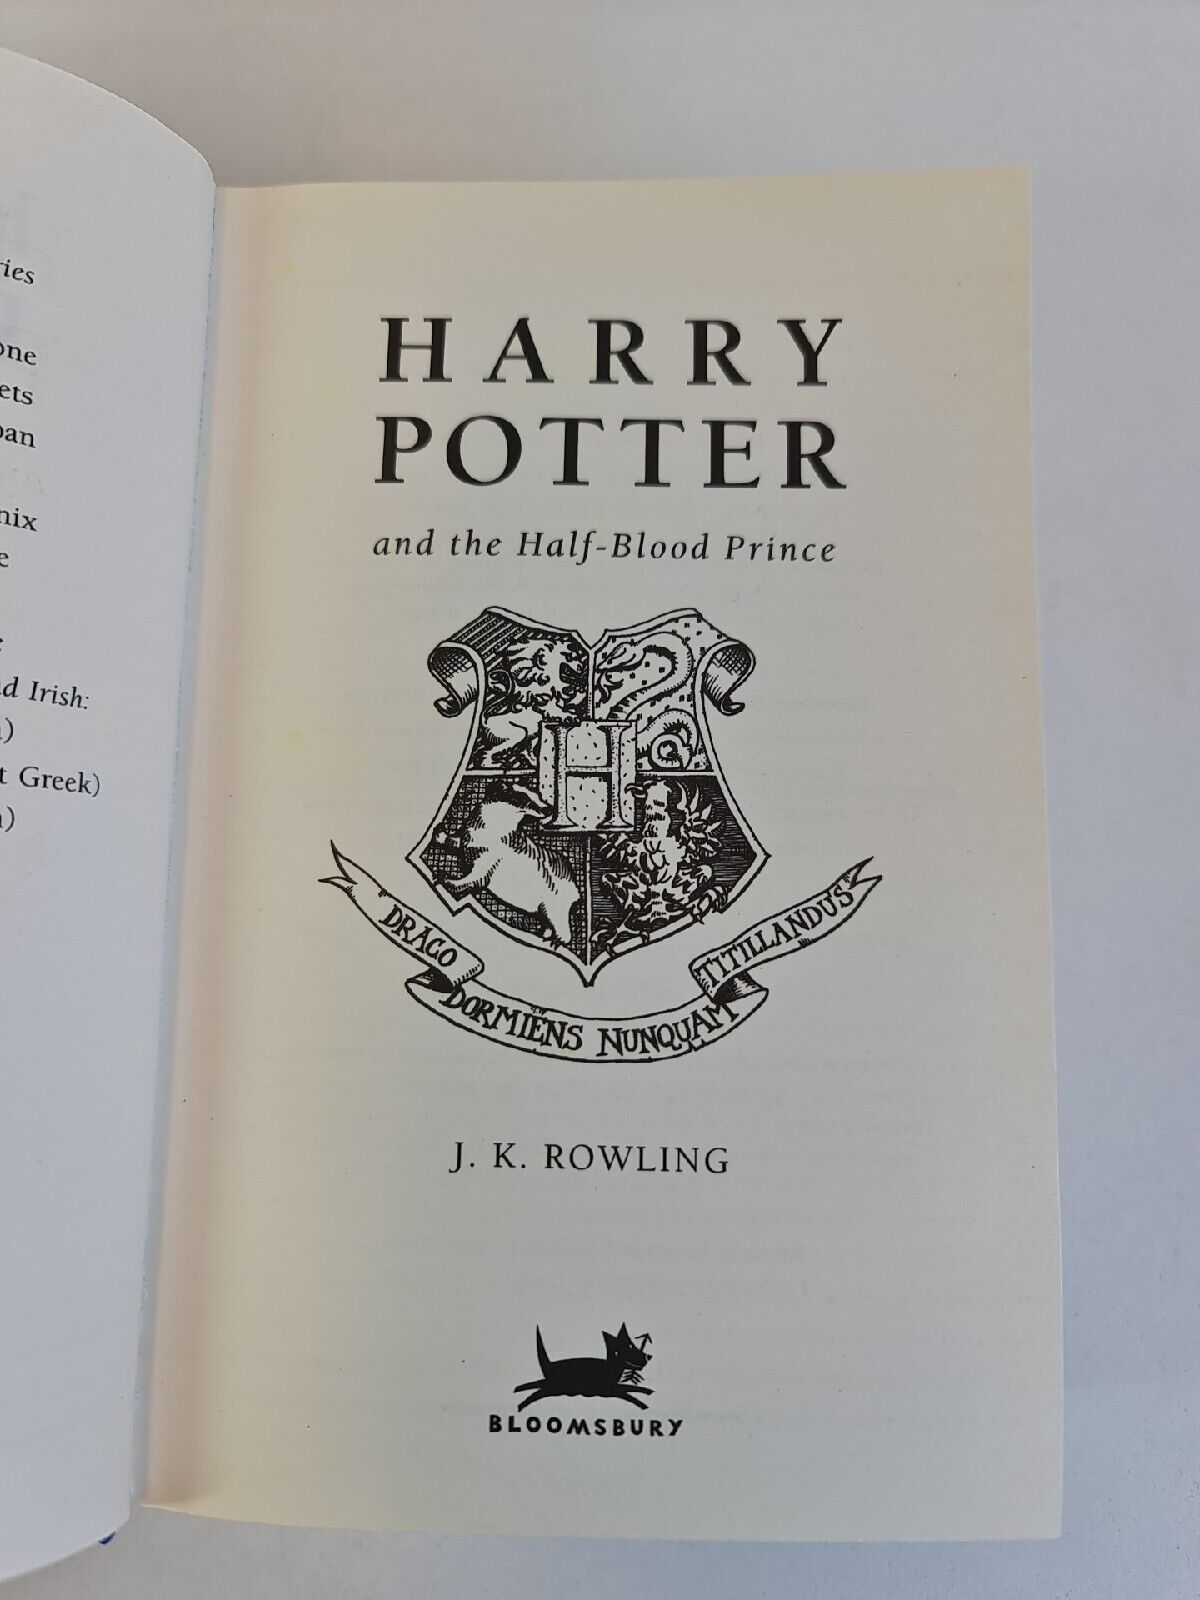 Harry Potter and the Half-Blood Prince by J. K. Rowling (2005) - OWL Misprint